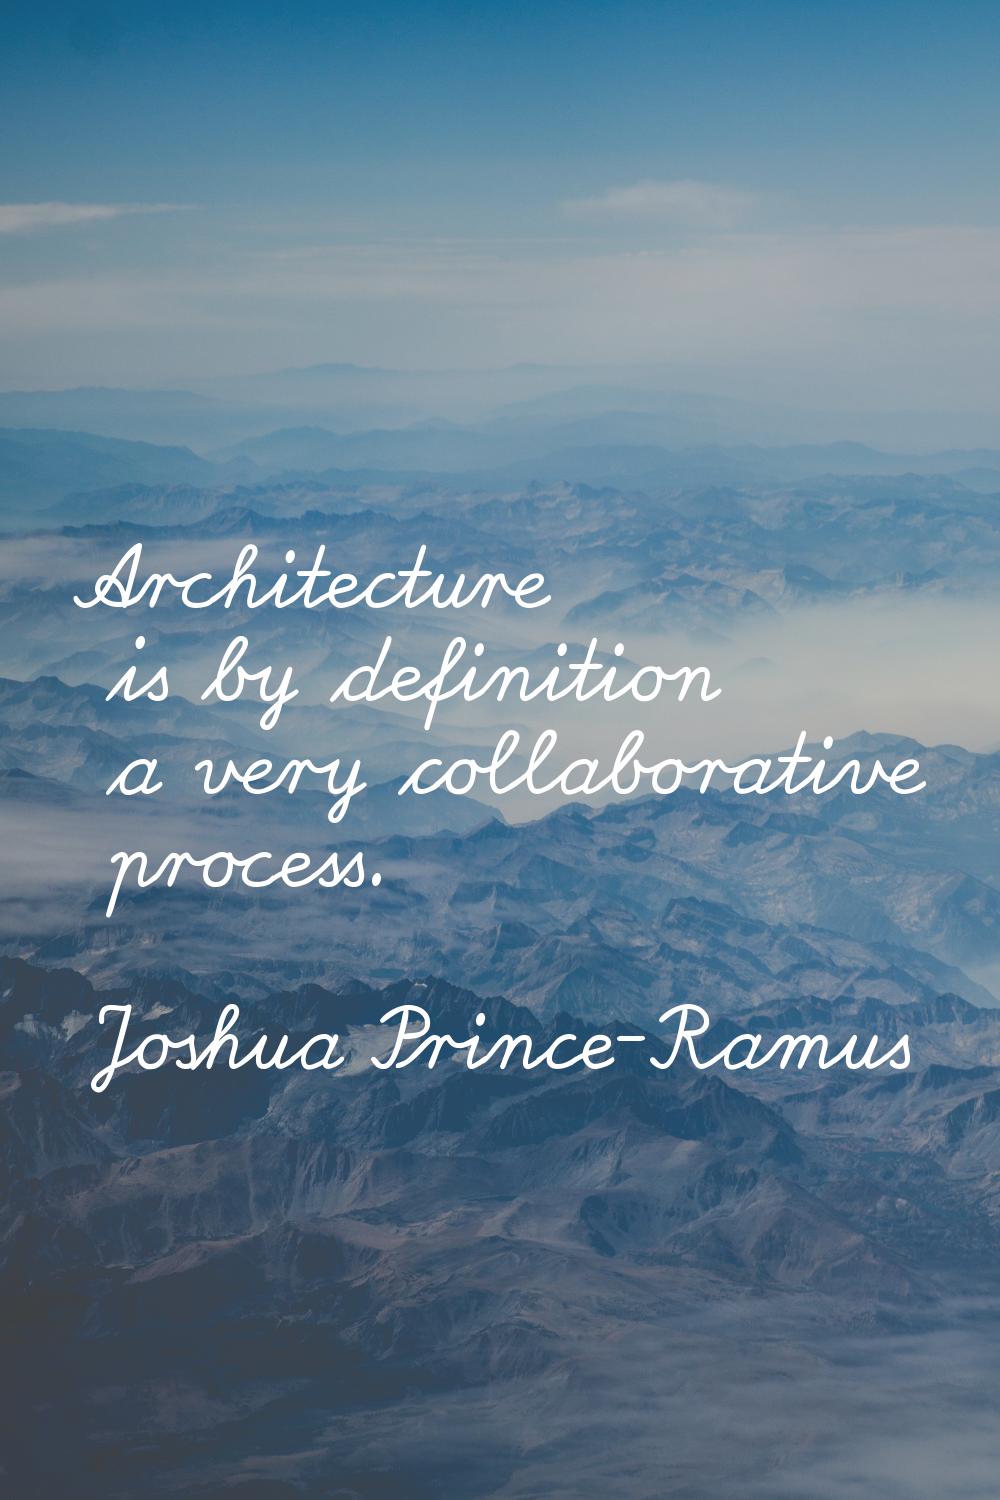 Architecture is by definition a very collaborative process.